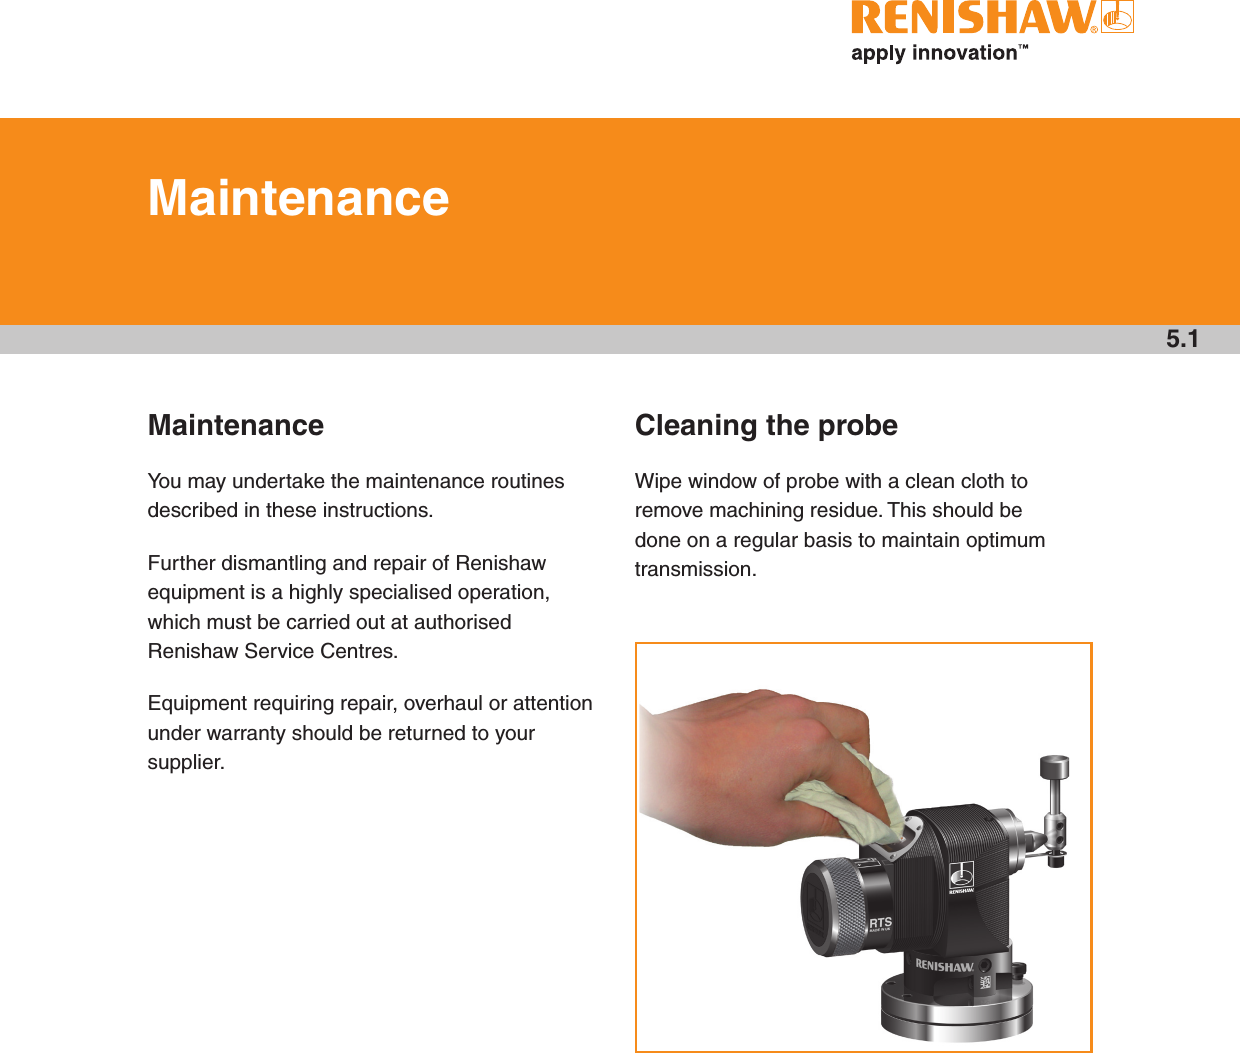 MaintenanceYou may undertake the maintenance routines described in these instructions.Further dismantling and repair of Renishaw equipment is a highly specialised operation, which must be carried out at authorised Renishaw Service Centres.Equipment requiring repair, overhaul or attention under warranty should be returned to your supplier.Cleaning the probeWipe window of probe with a clean cloth to remove machining residue. This should be done on a regular basis to maintain optimum transmission.5.1Maintenance